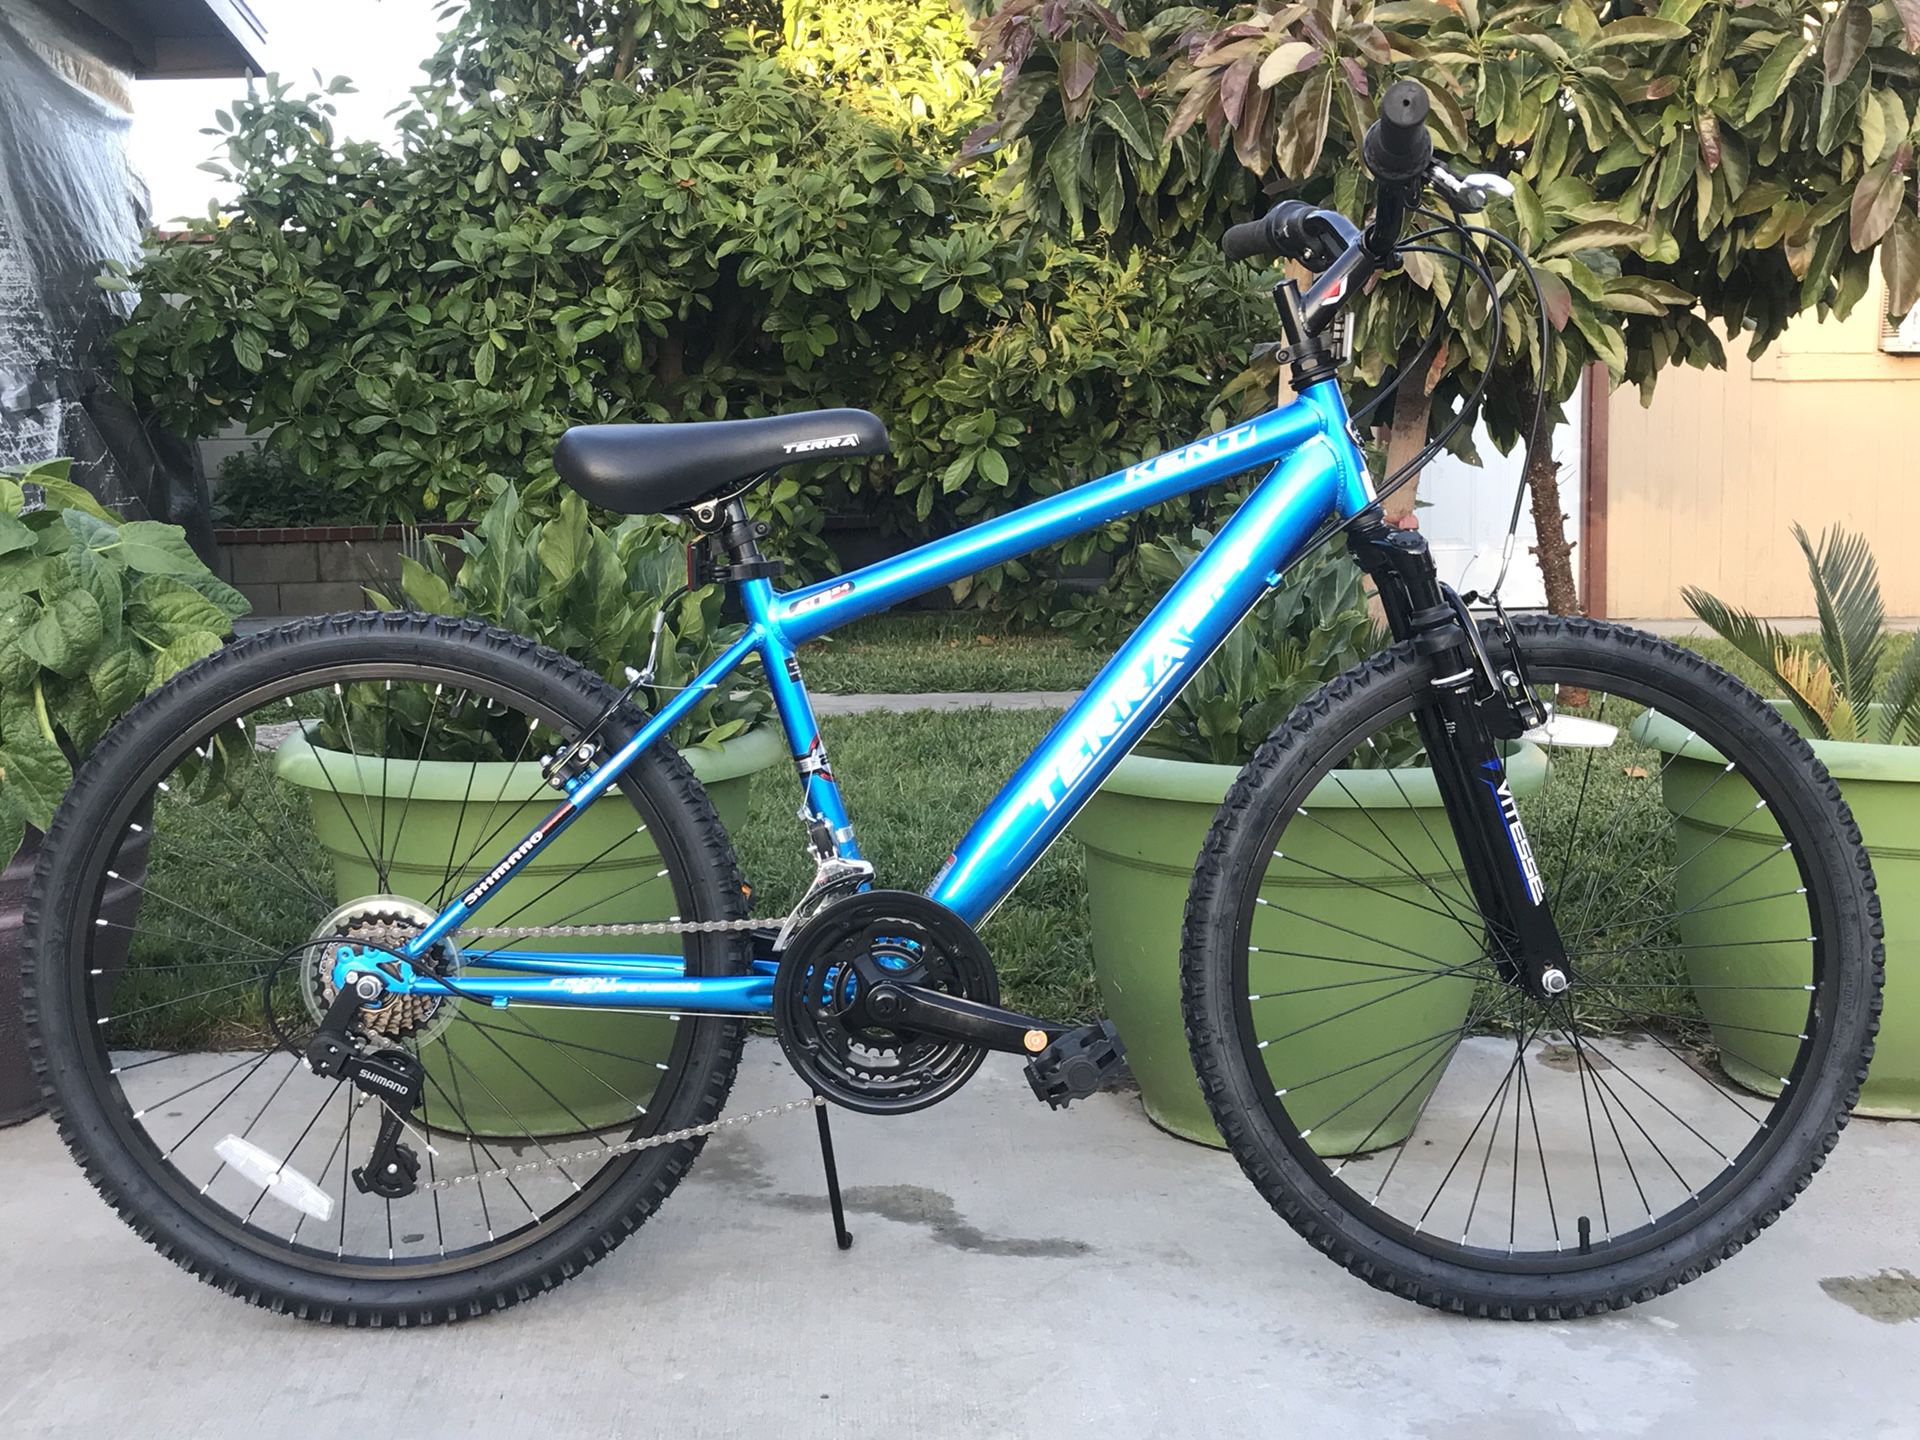 Kent Terra 2.4 24" Boys' Royal Blue for Sale in Covina, CA OfferUp